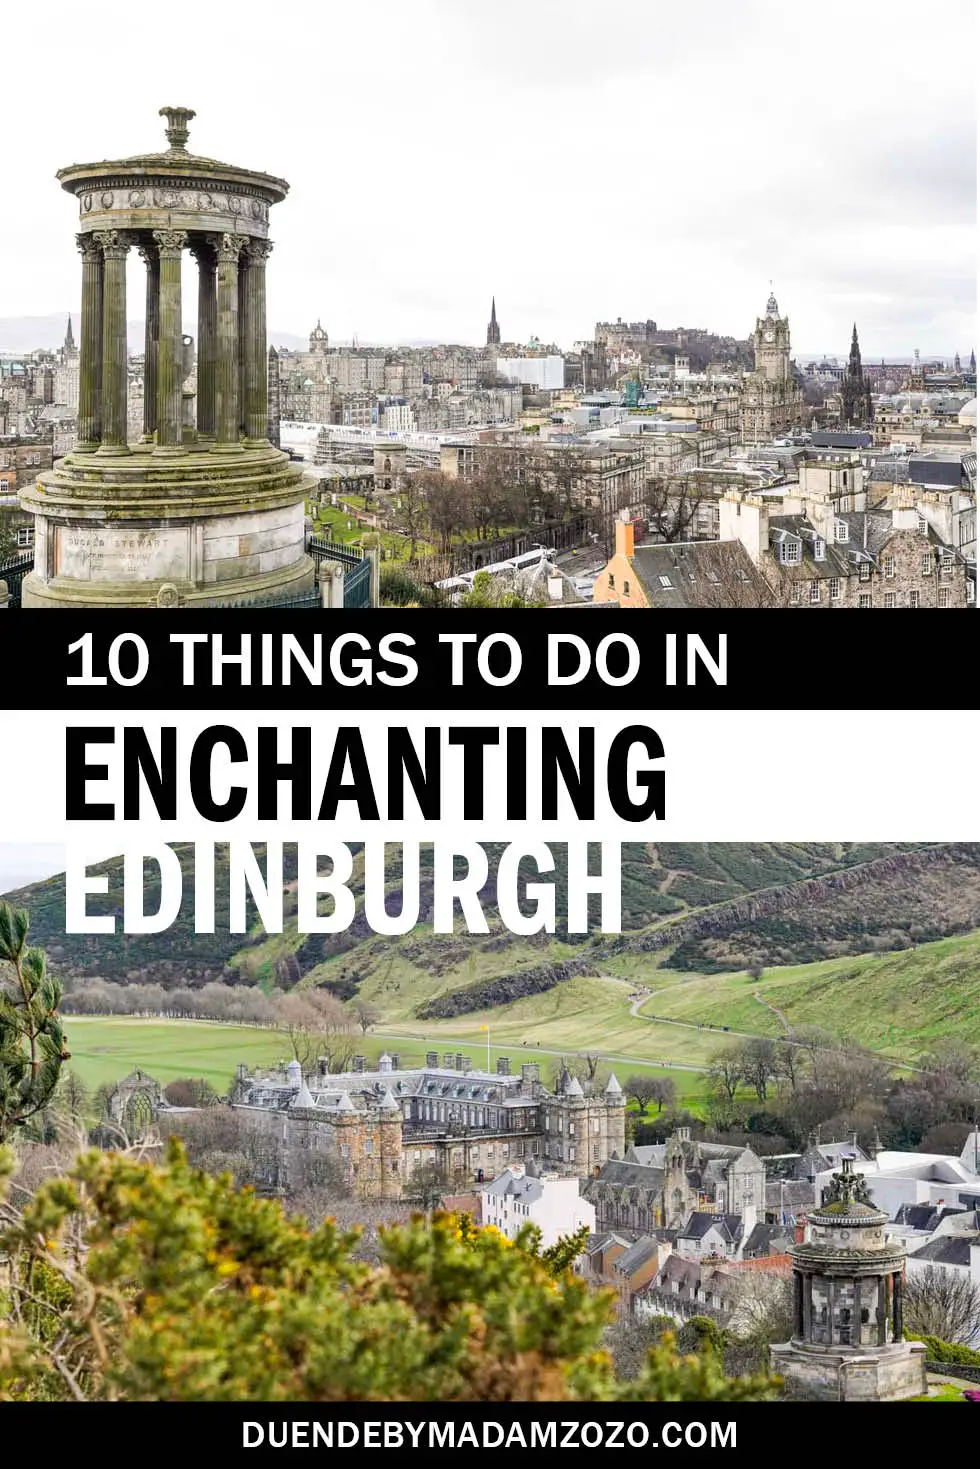 Images of Edinburgh skyline and Holyrood Castle with title reading "10 Things to do in Enchanting Edinburgh"